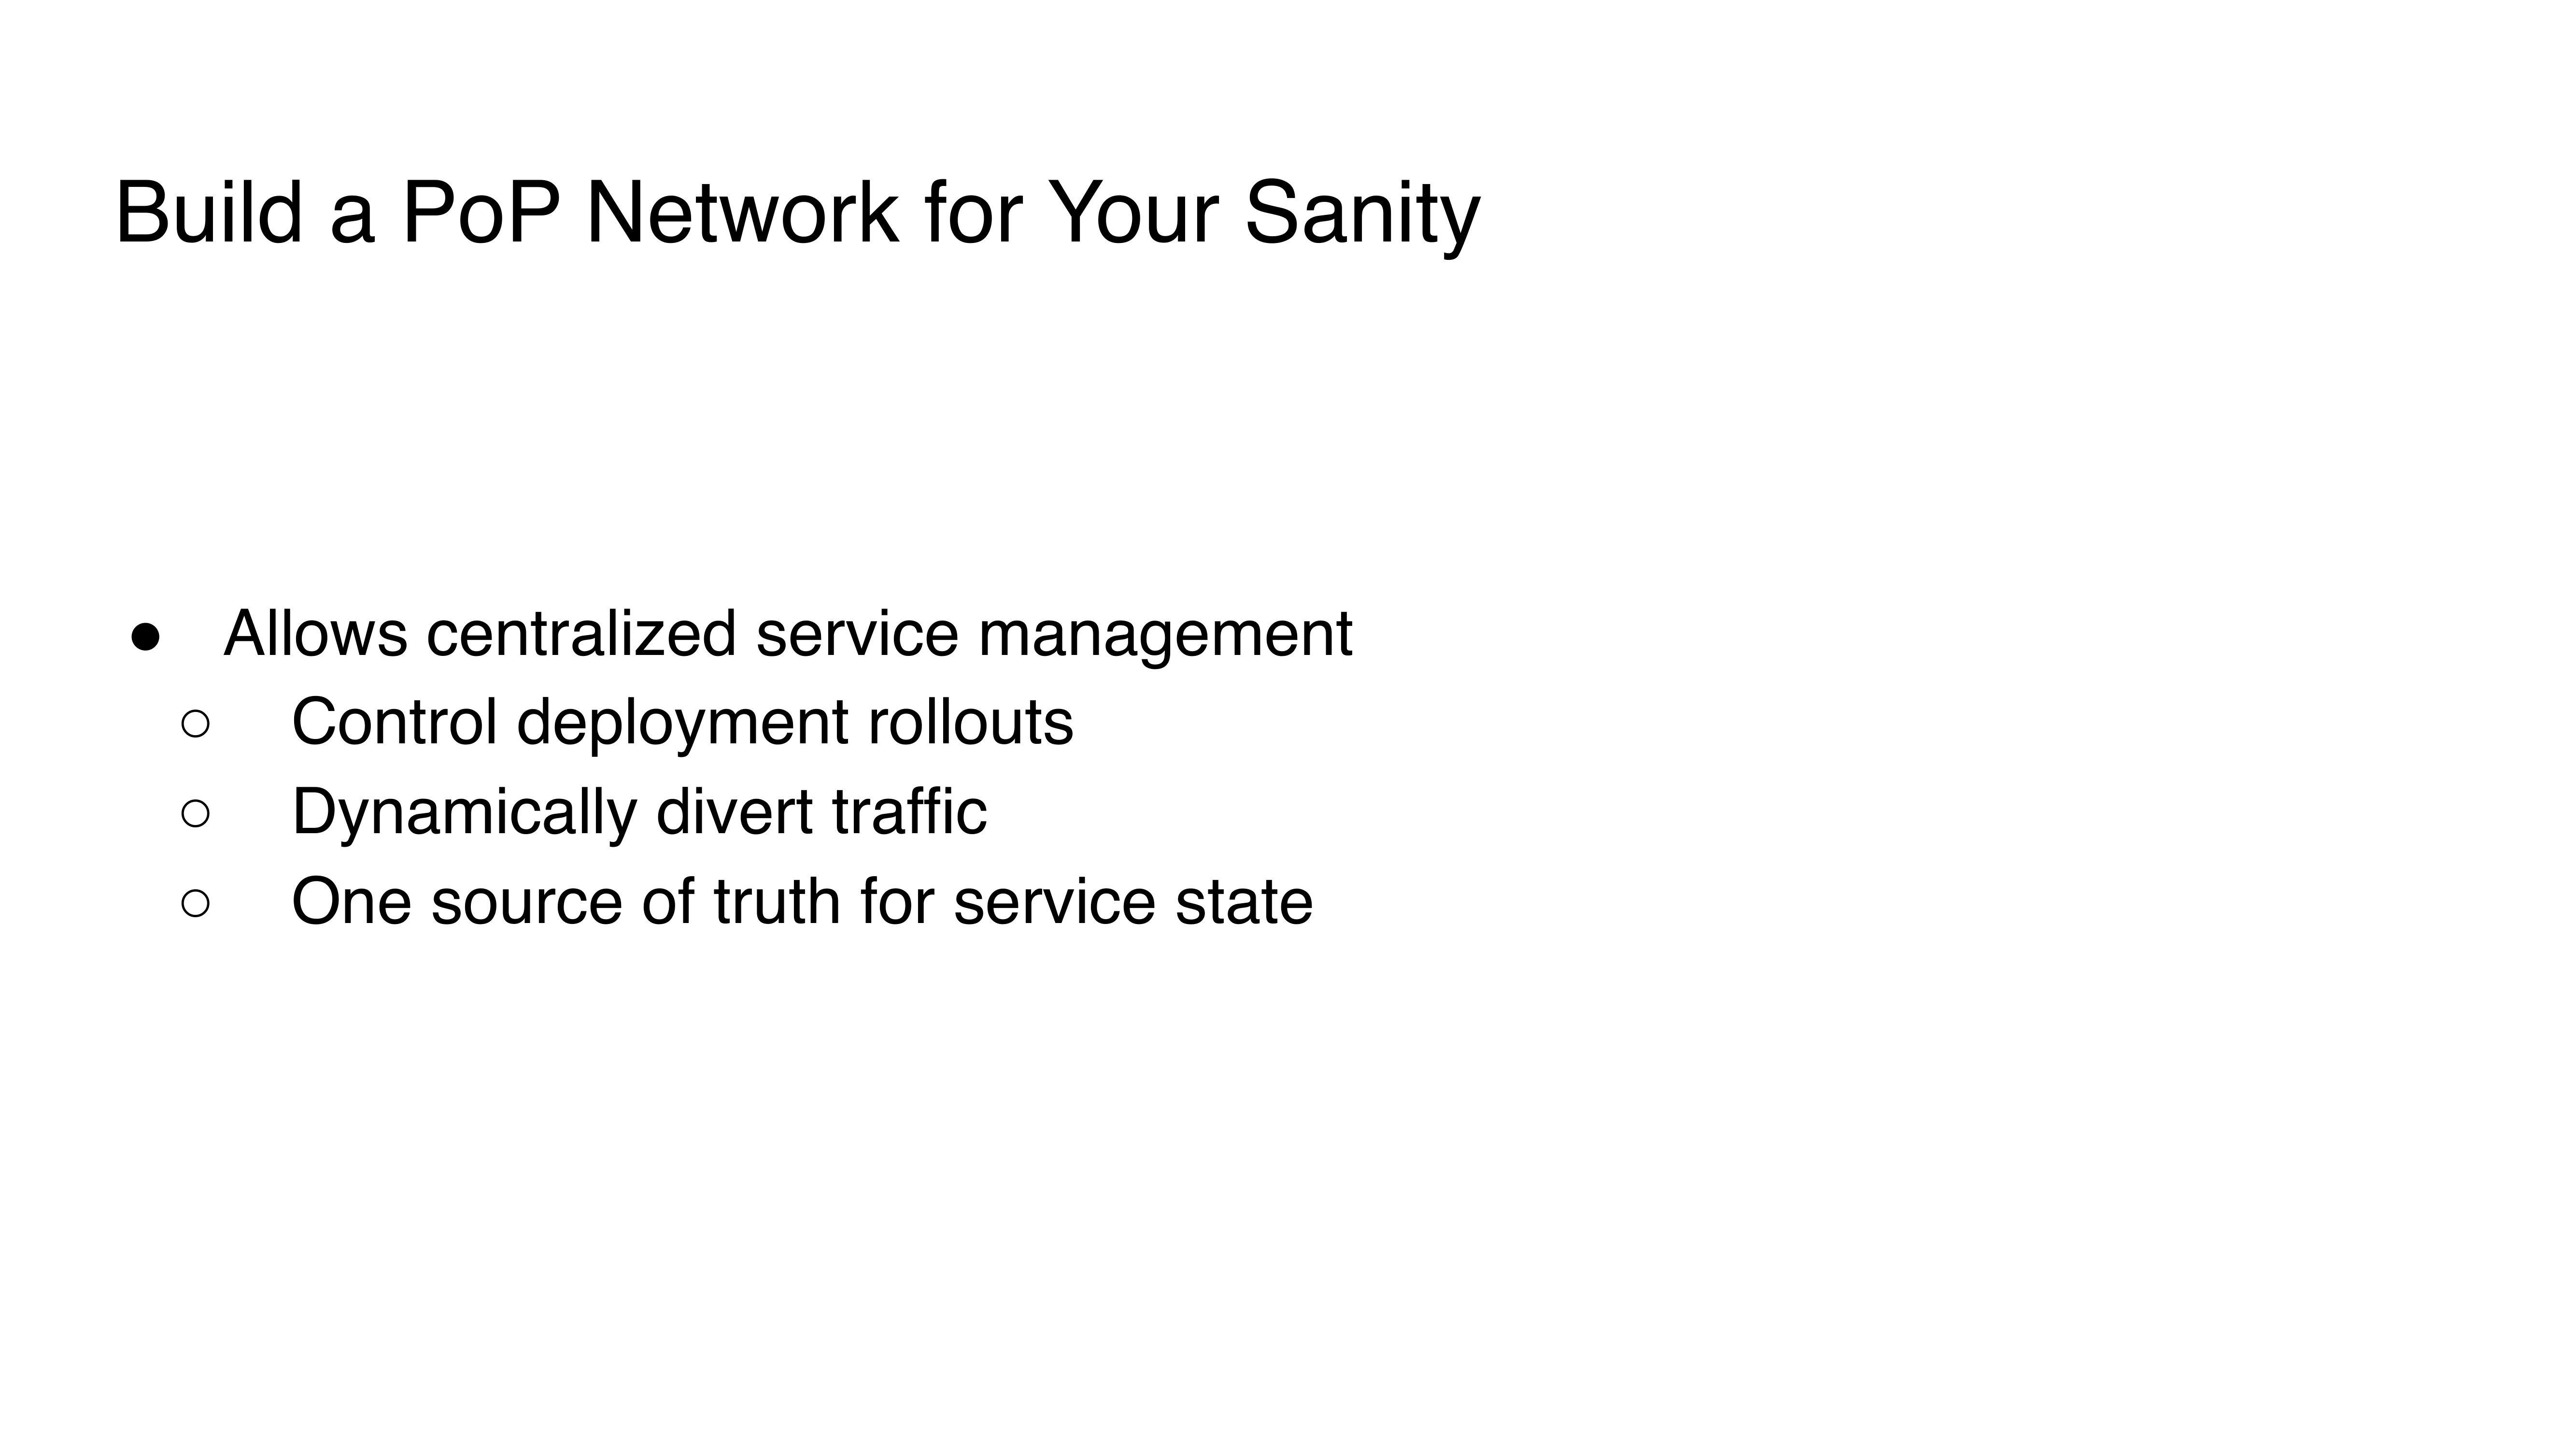 9.-build-a-pop-network-for-your-sanity_centralized-service-management